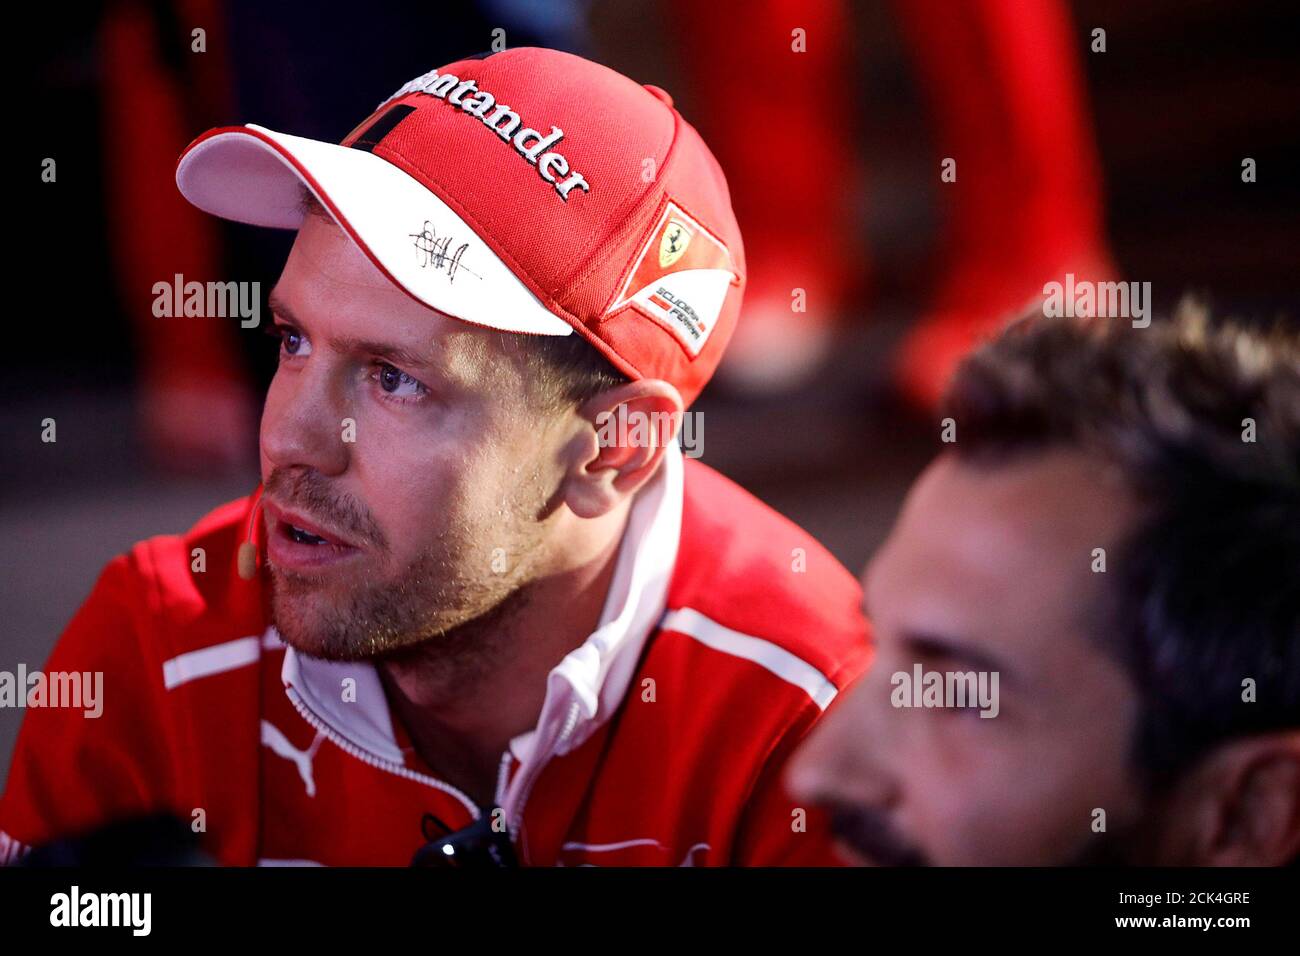 Ferrari's Sebastian Vettel of Germany is seen next to a racing simulator ahead of the Mexican F1 Grand Prix on October 29, in Mexico City, Mexico, October 26, 2017. REUTERS/Edgard Garrido Stock Photo